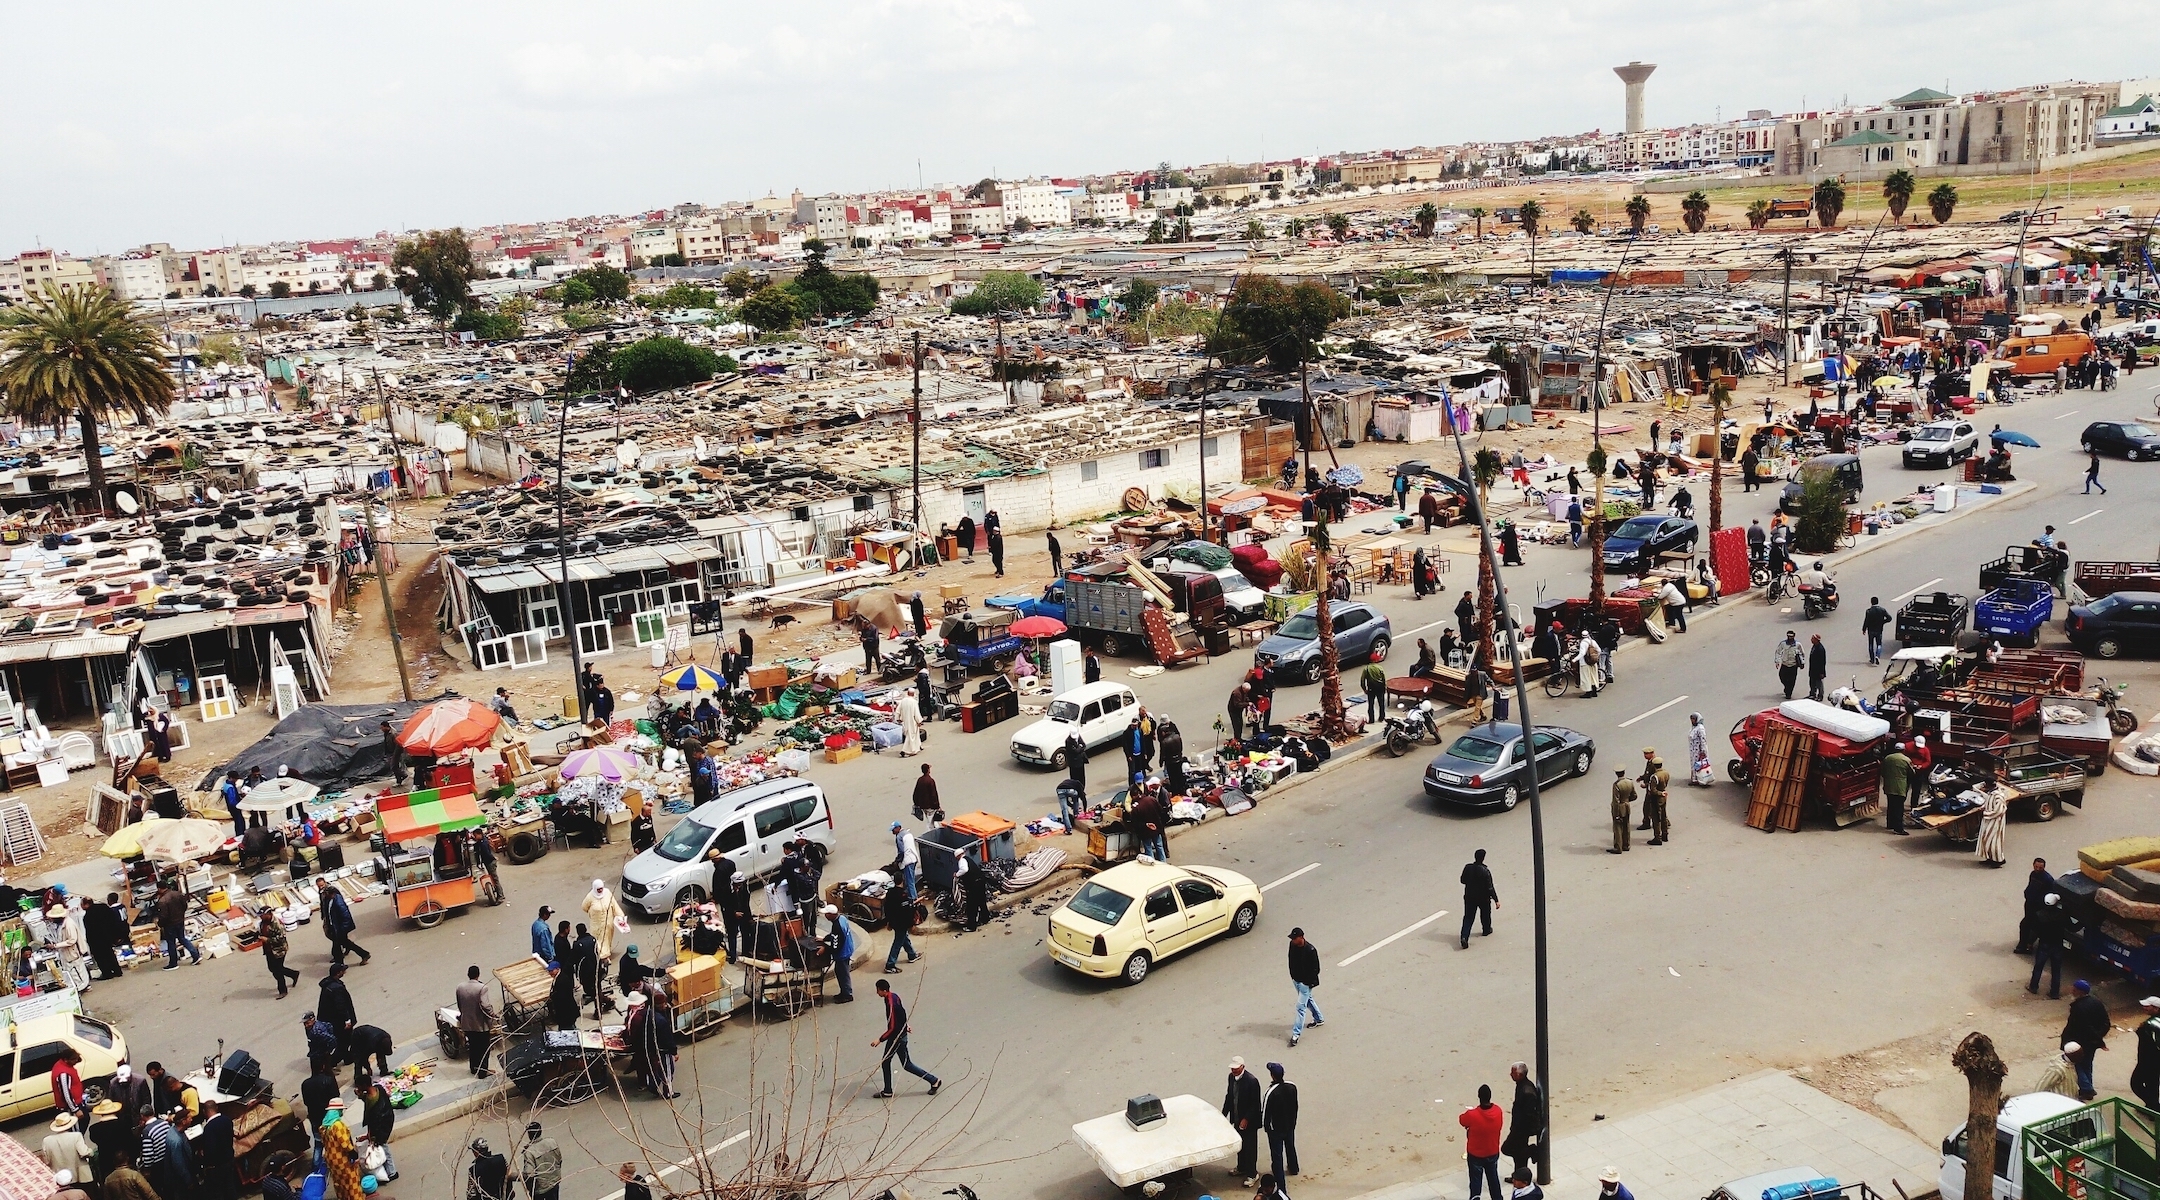 A view of Rabat, Morocco’s capital city. (Getty Images)